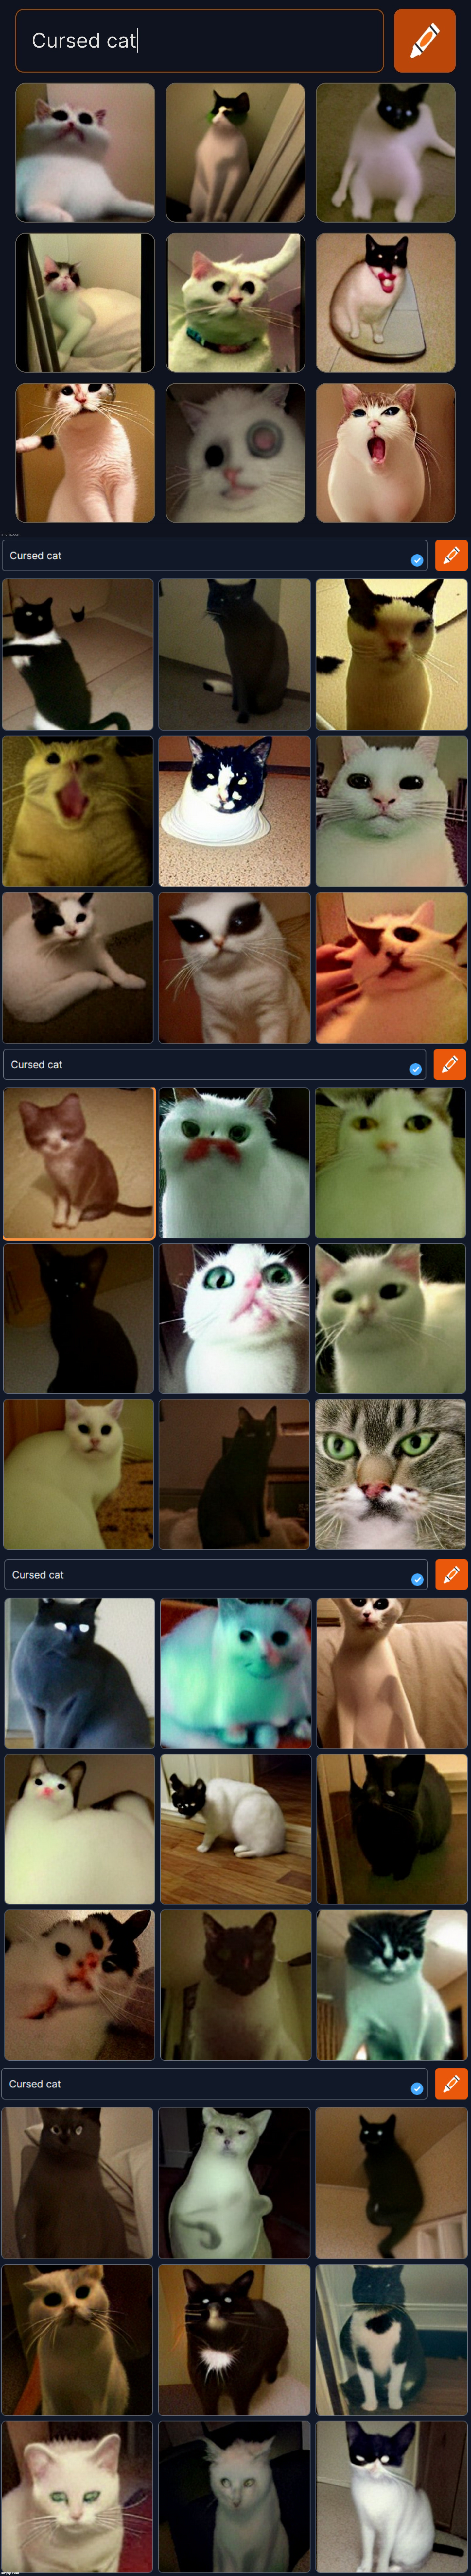 Here are loads of cursed cats! | image tagged in memes,cursed cat,cats | made w/ Imgflip meme maker